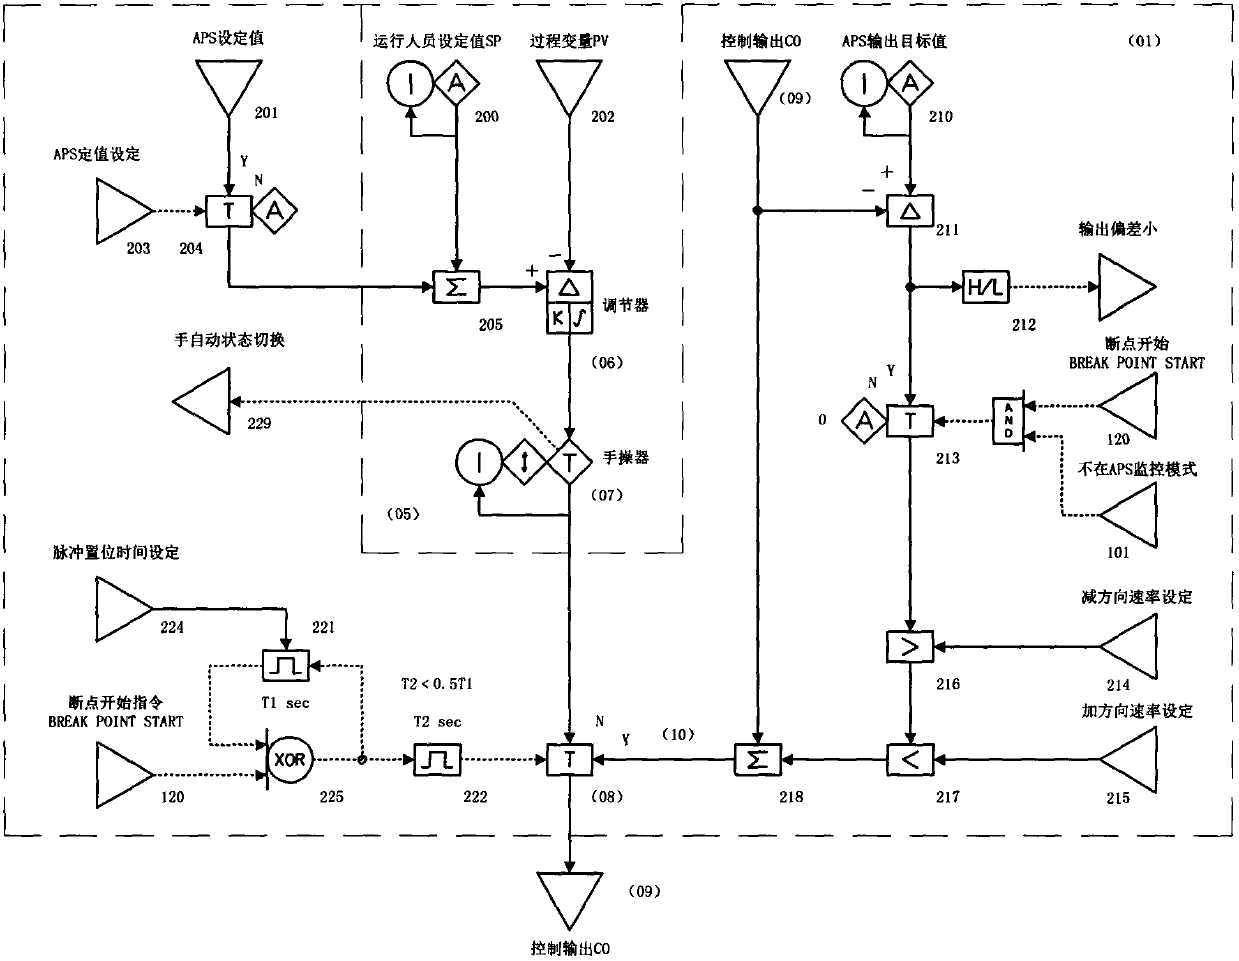 Implementation method of operation interface of automatic plant start-up &and shut-down system